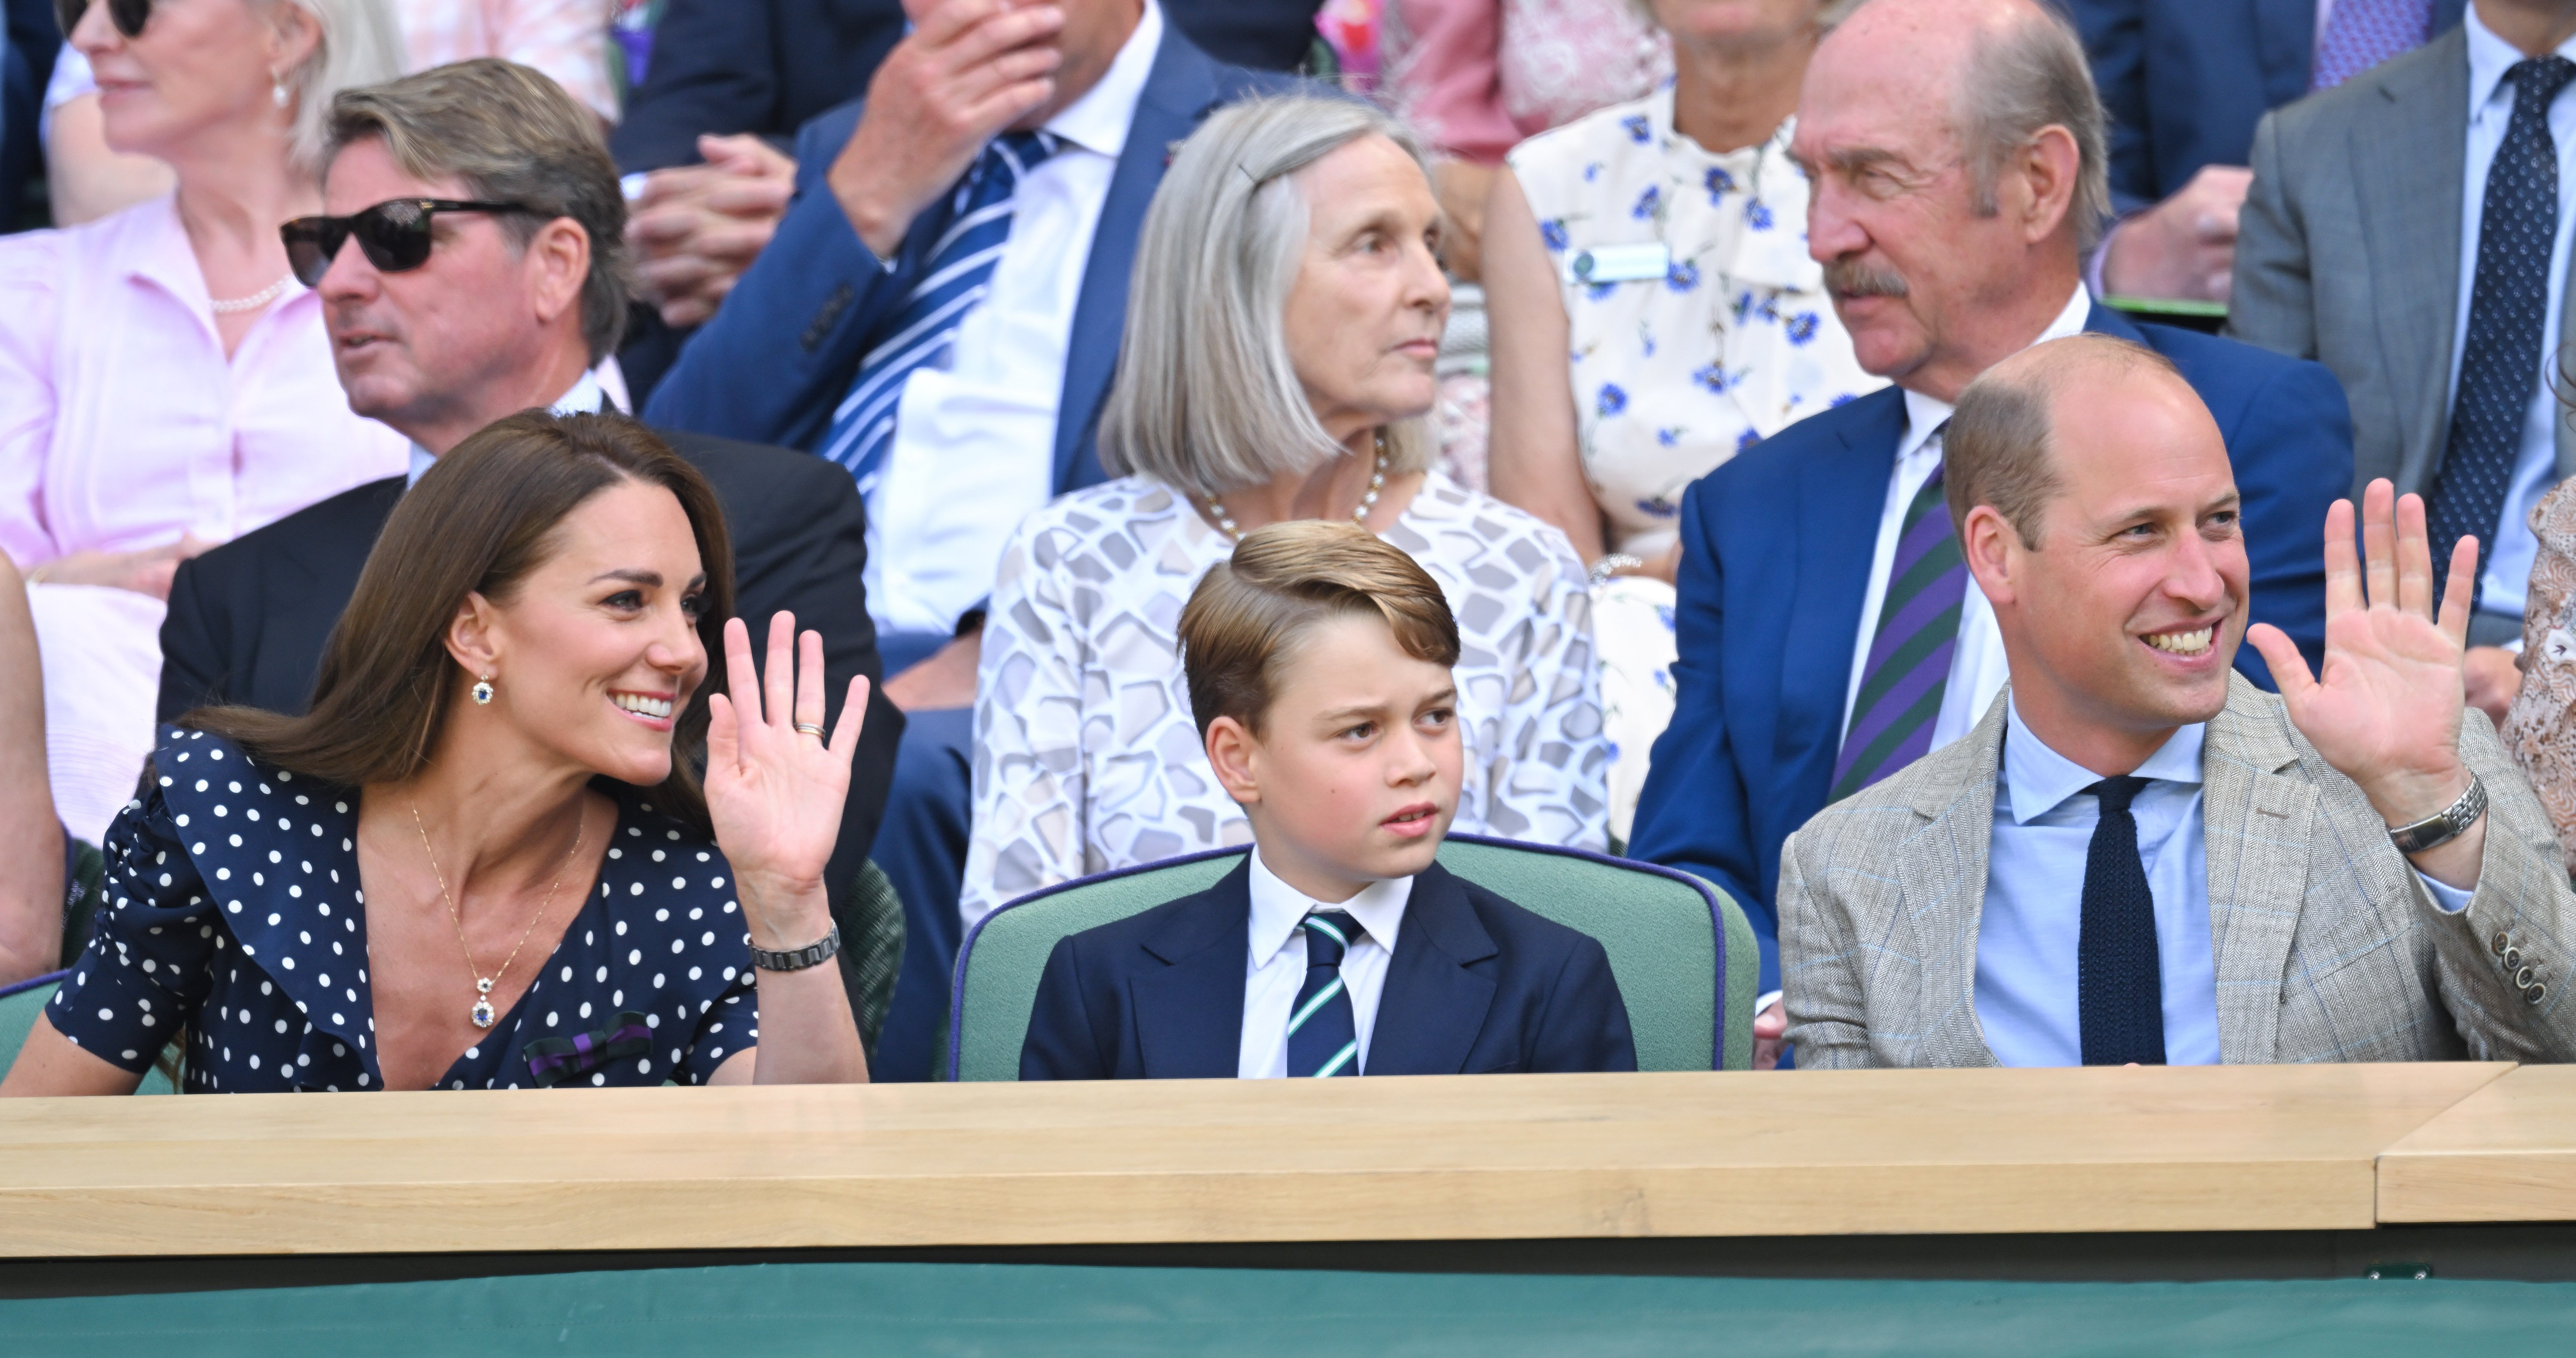 Catherine, Duchess of Cambridge, Prince George of Cambridge and Prince William, Duke of Cambridge attend The Wimbledon Men's Singles Final at All England Lawn Tennis and Croquet Club on July 10, 2022 in London, England. | Source: Getty Images